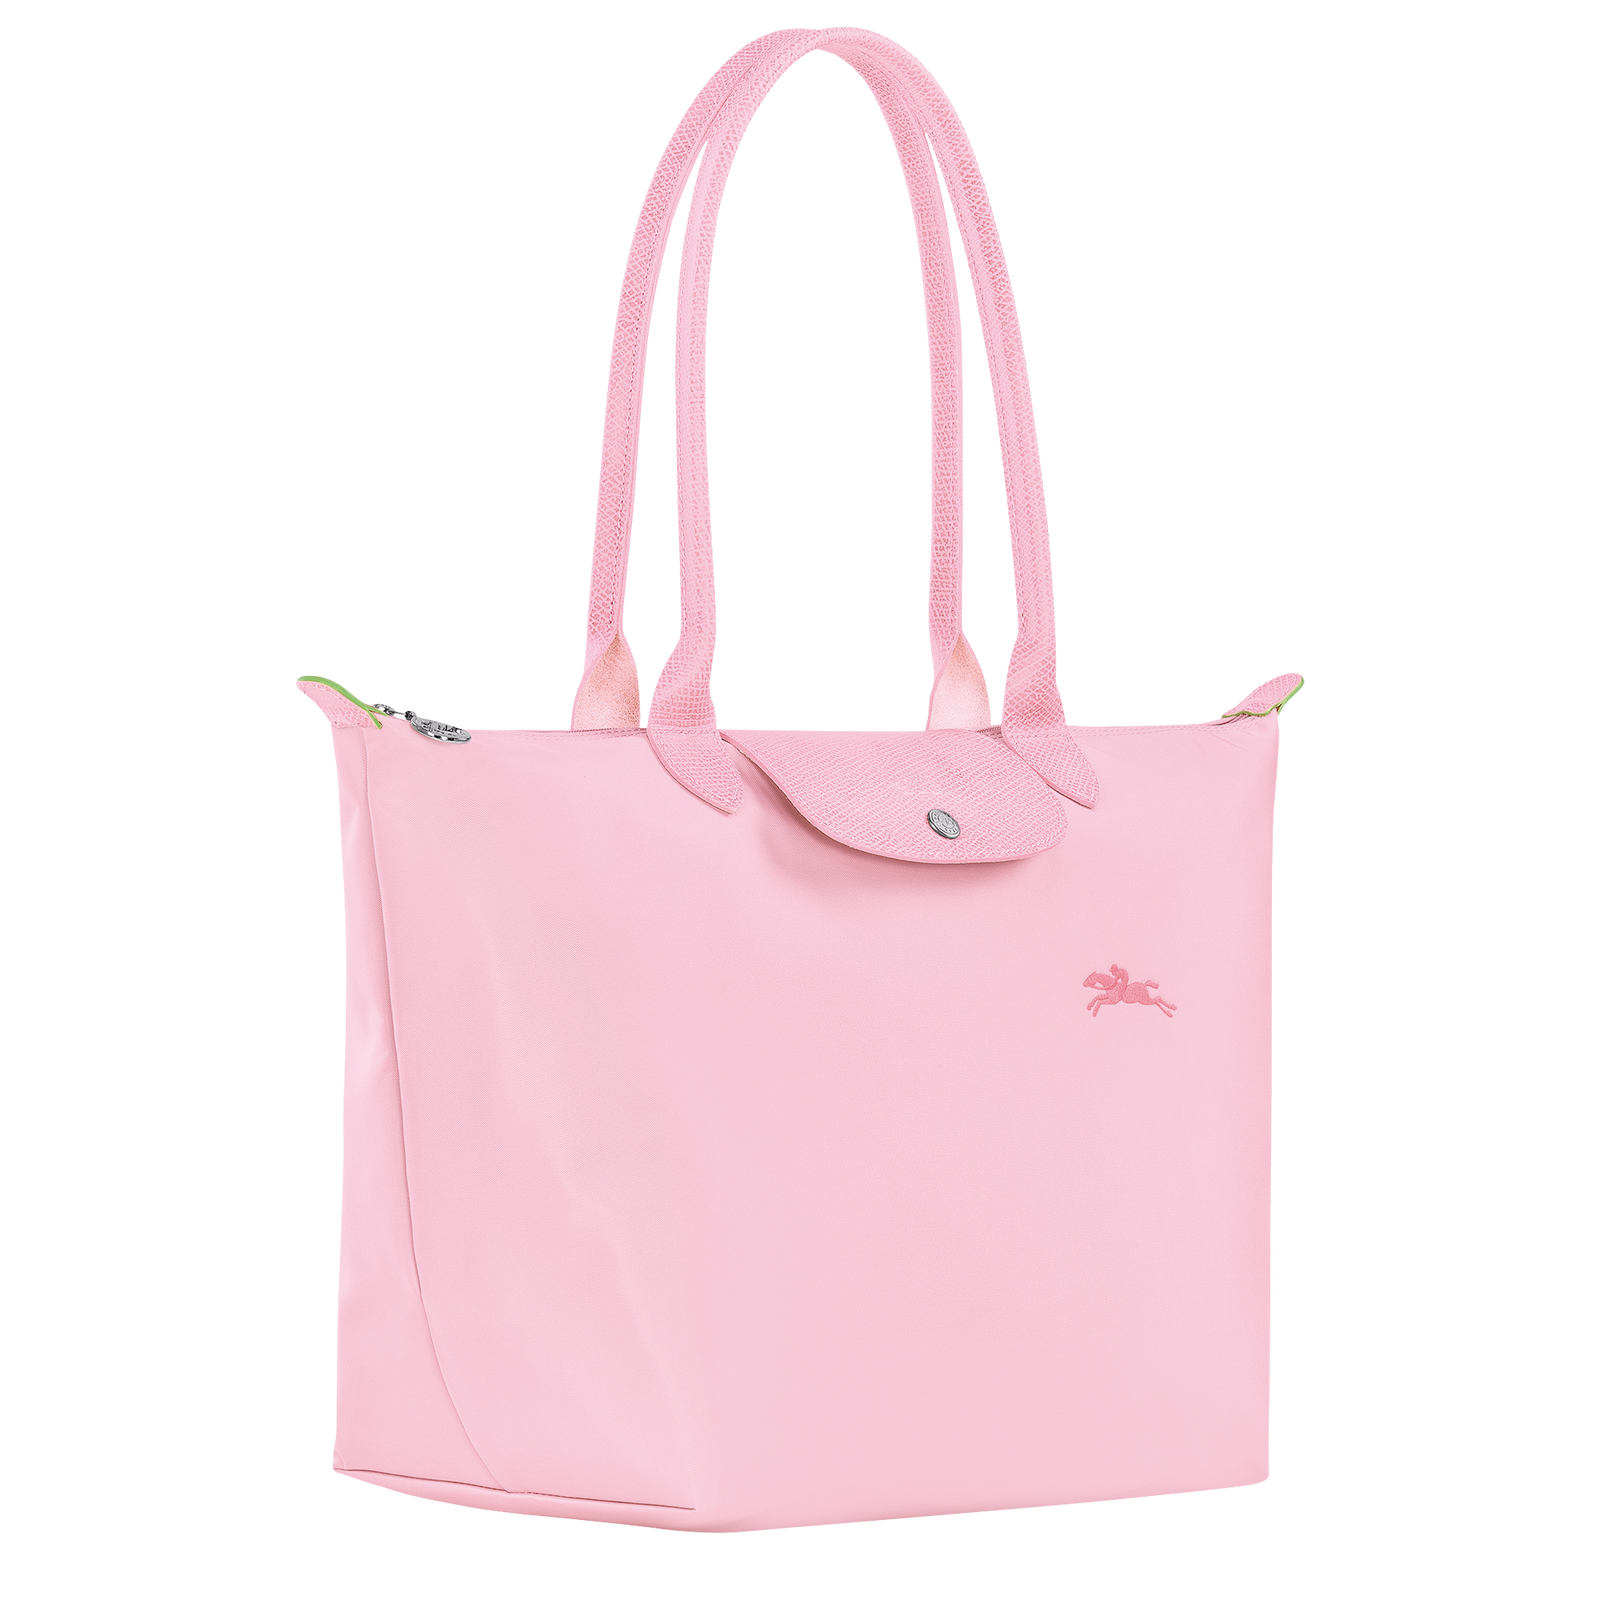 Best Pink Accessories - Hot Pink Bags and Shoes